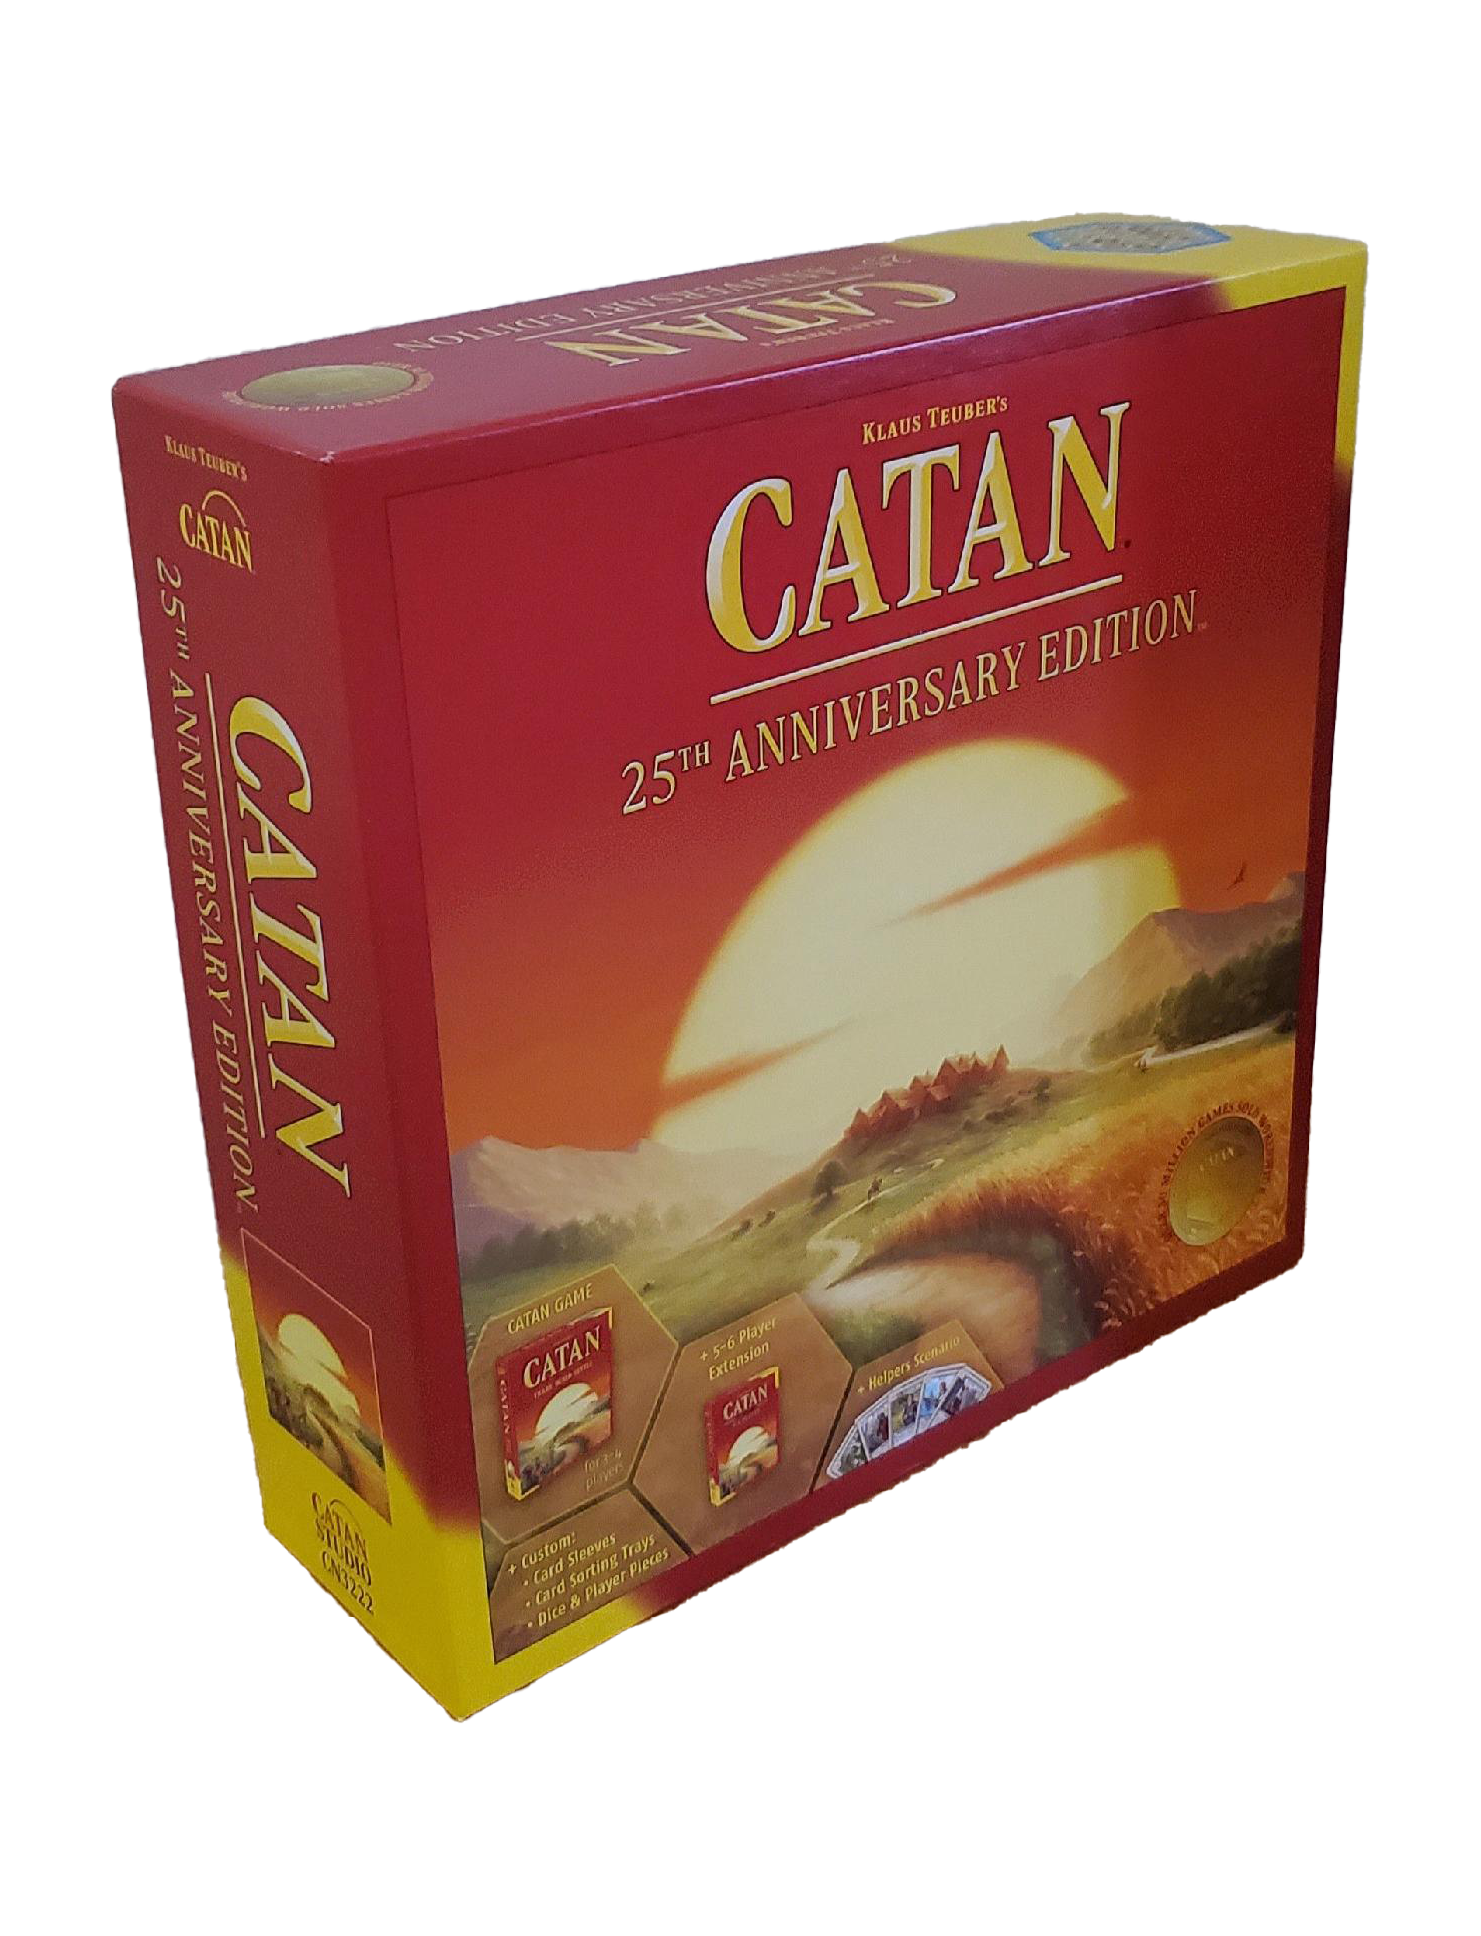 The board game Catan by Asmodee